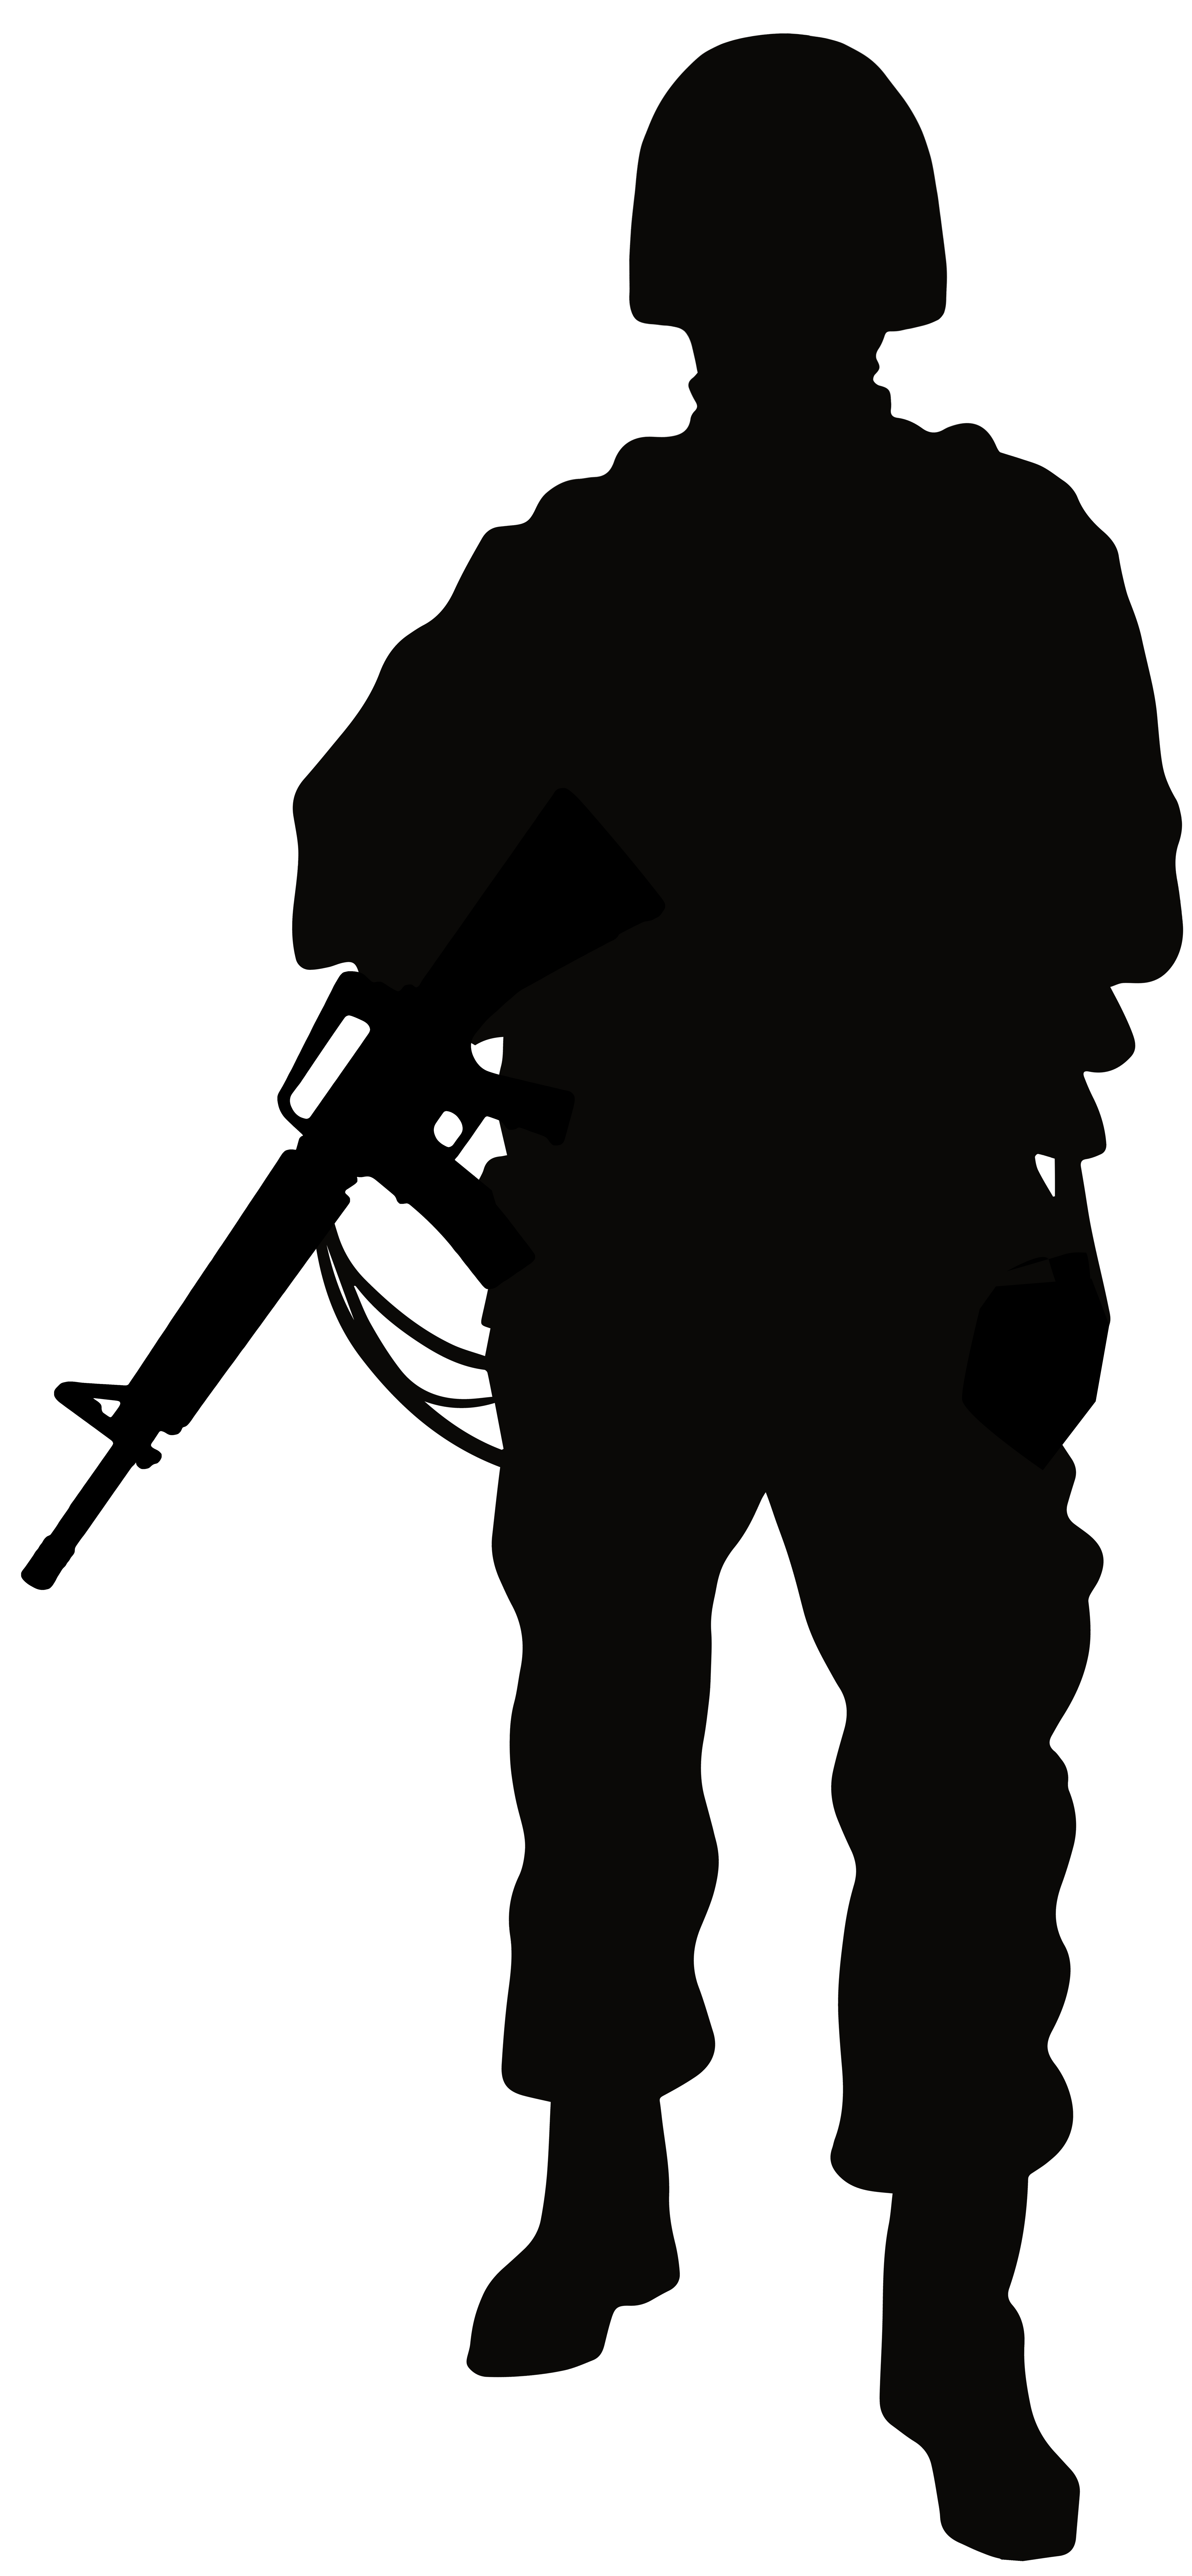 Soldier Silhouette Clipart​-Quality Free Image and Transparent PNG Clipart